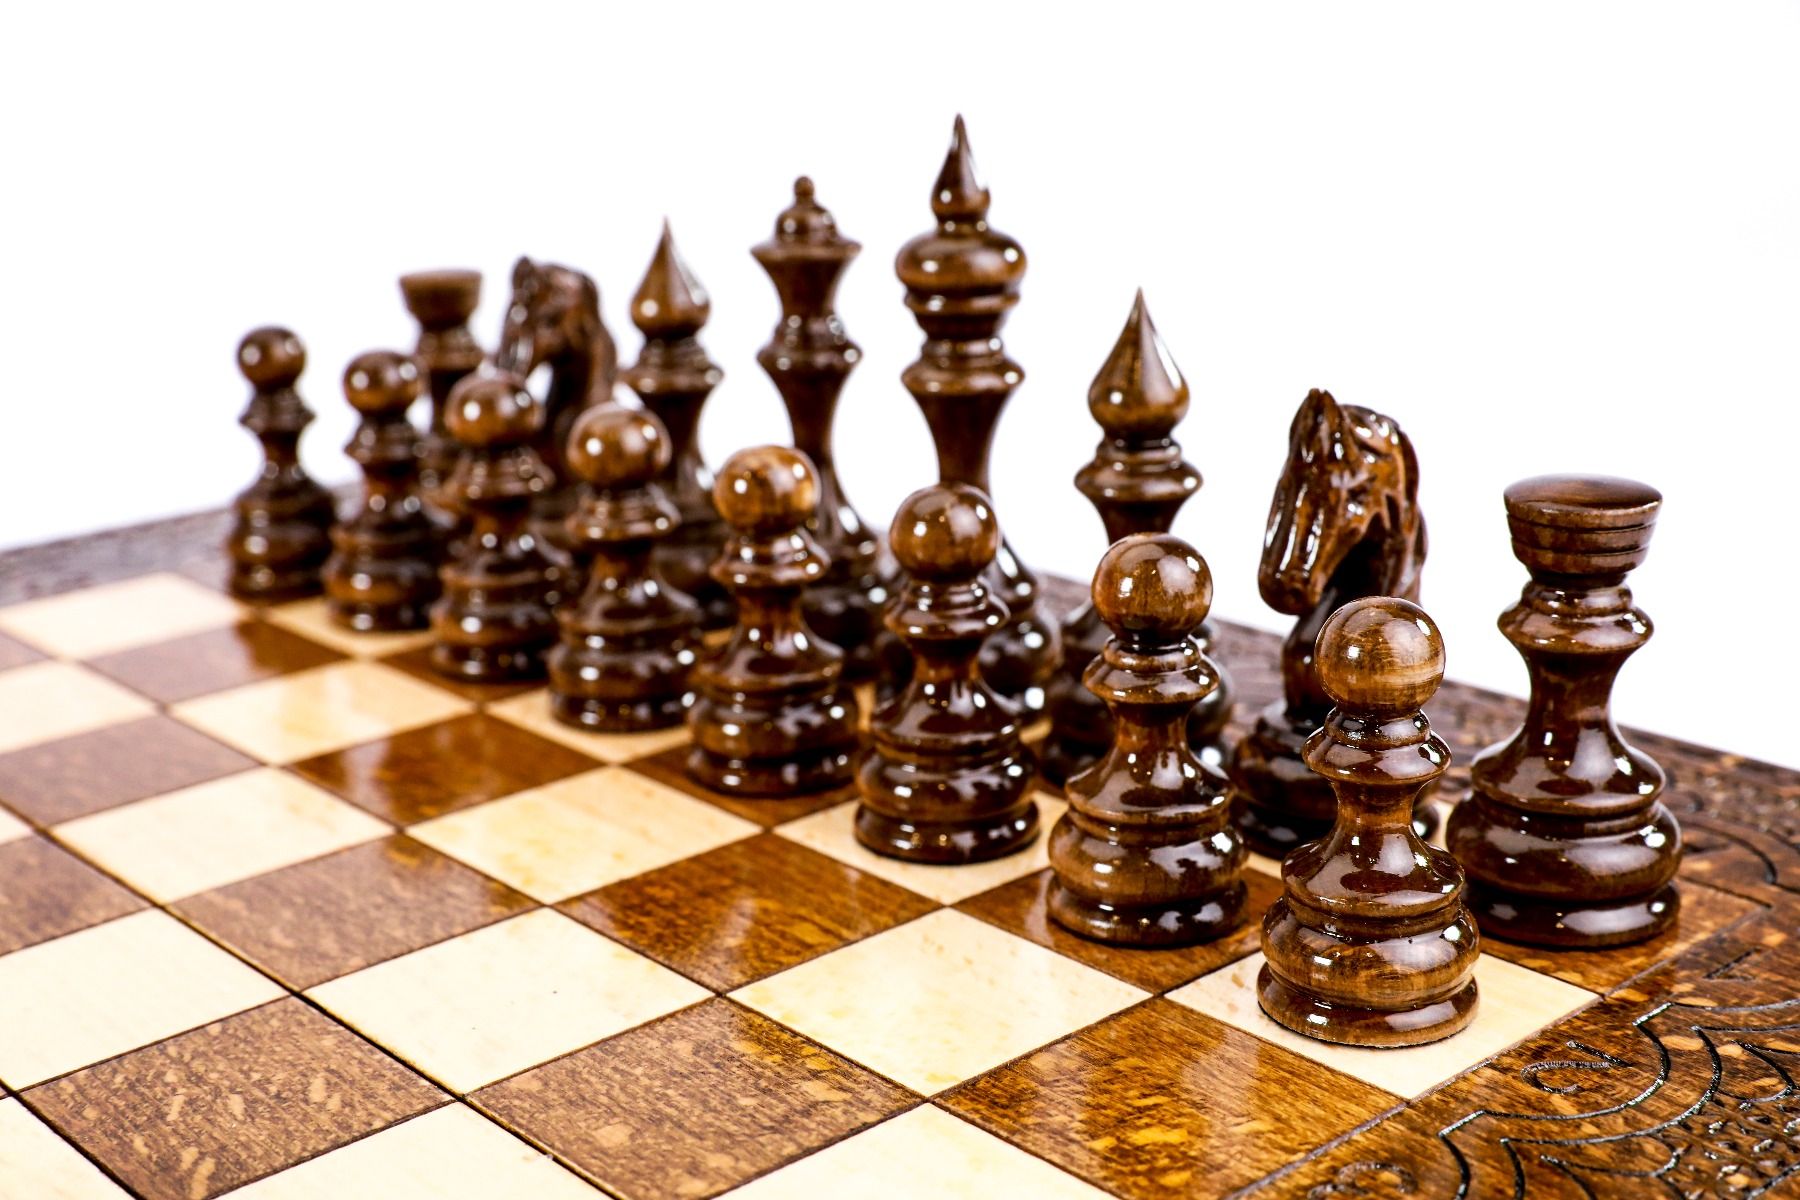 Let each match unfold with the Unique Wooden Chess Set, where strategy and art converge in a celebration of timeless elegance and handcrafted innovation.